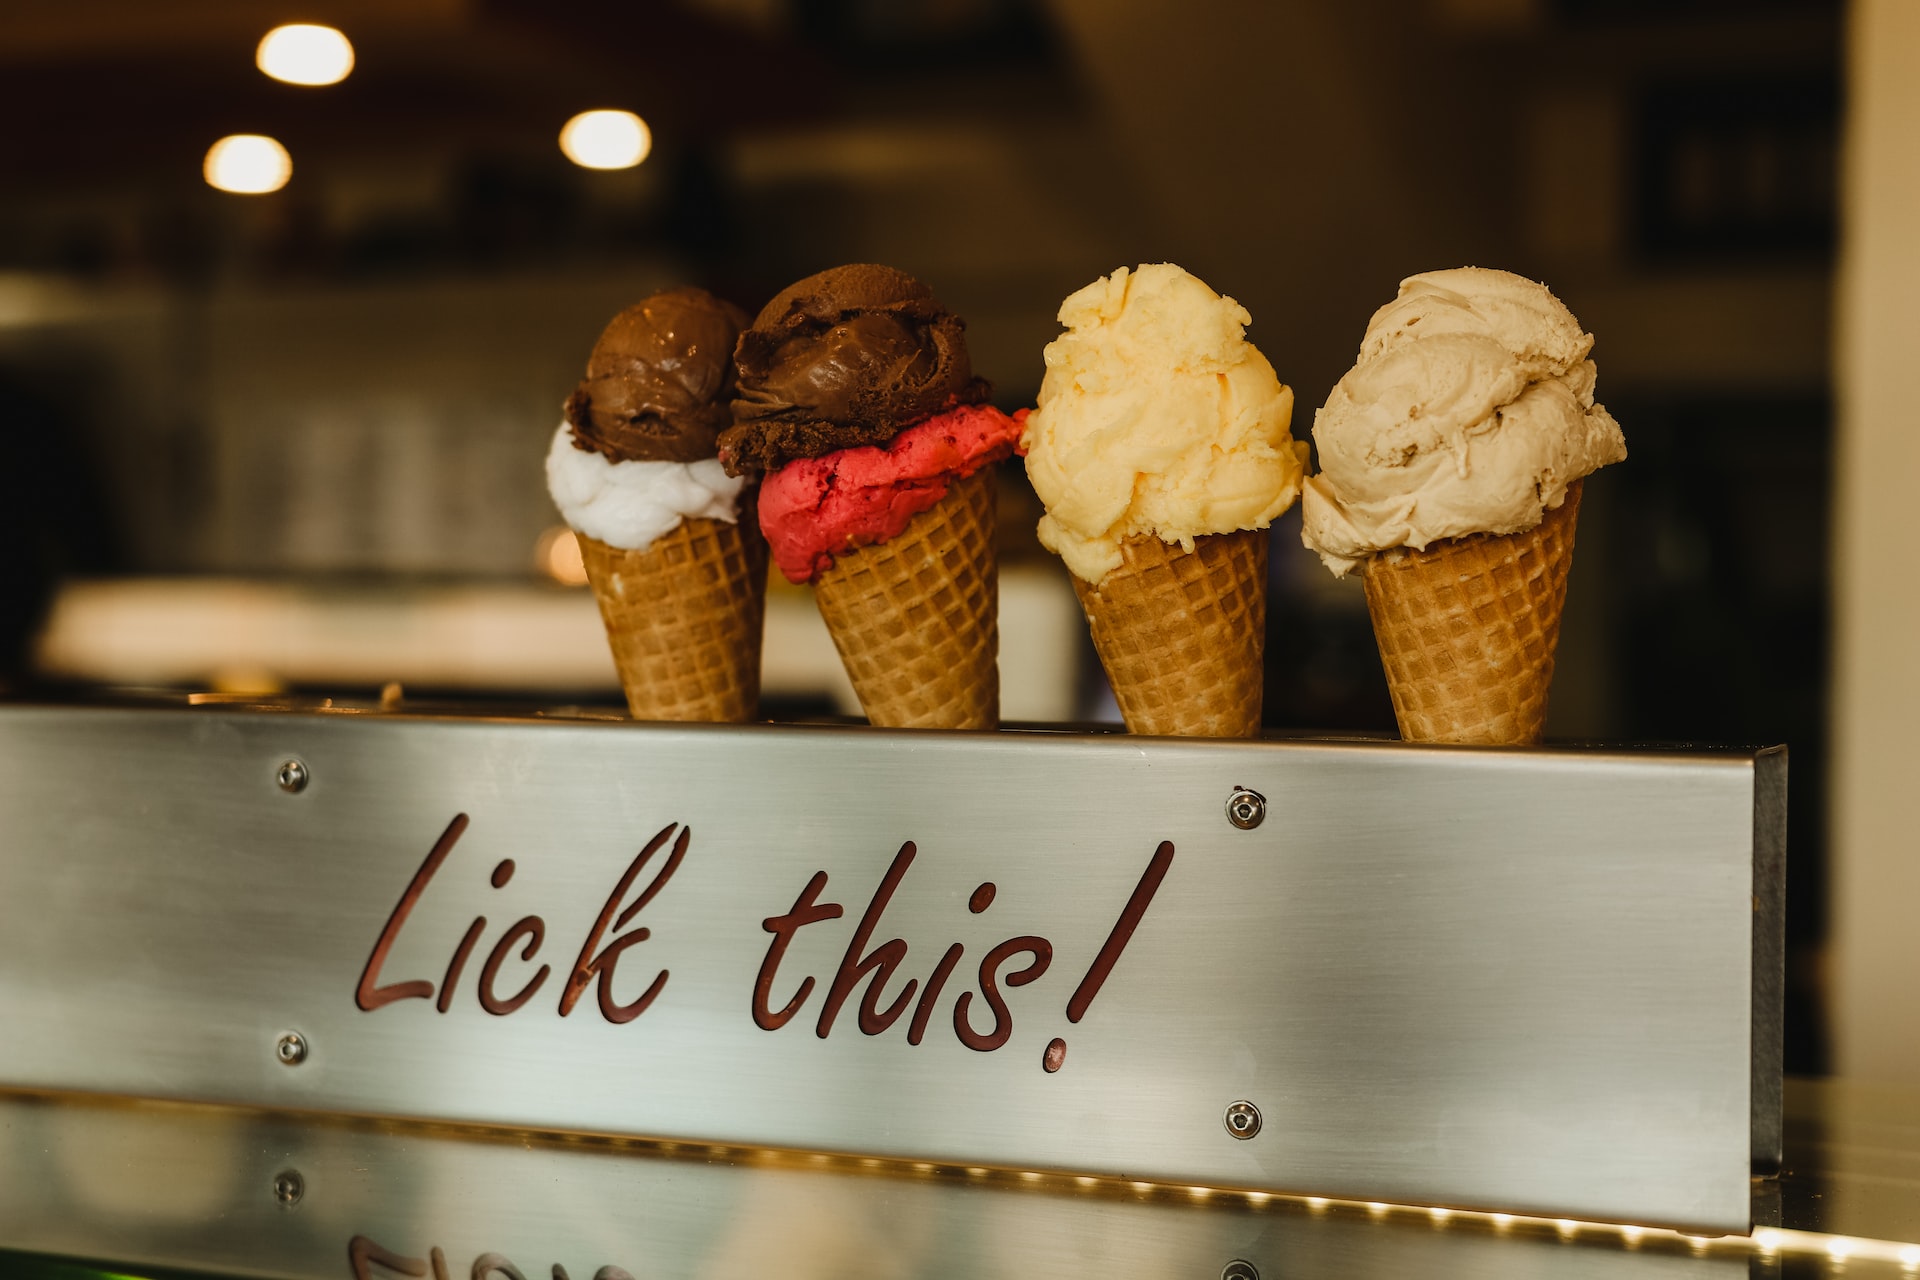 ice creams from around the world featured